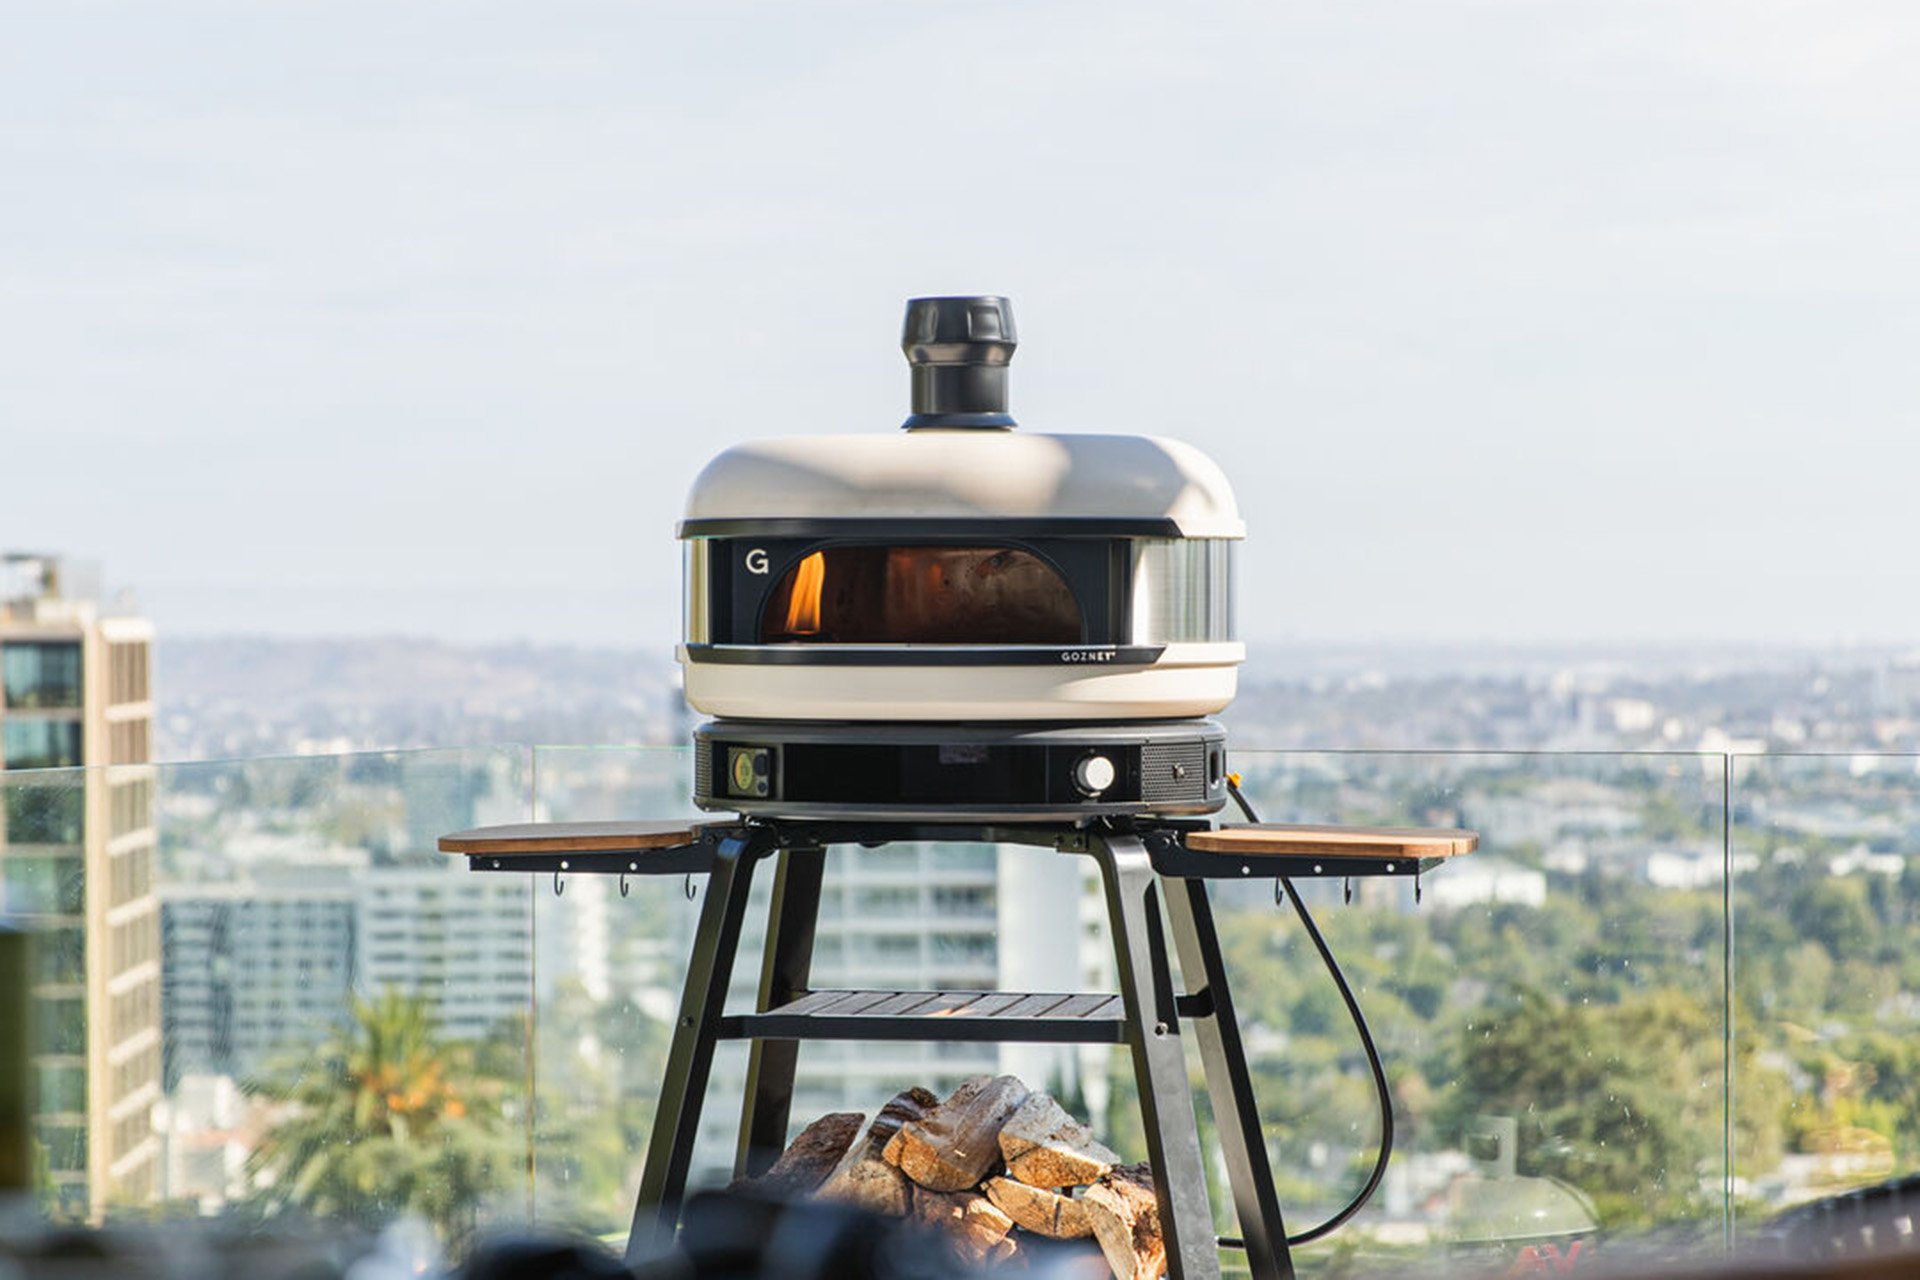 Your Gozney Dome Pizza Oven